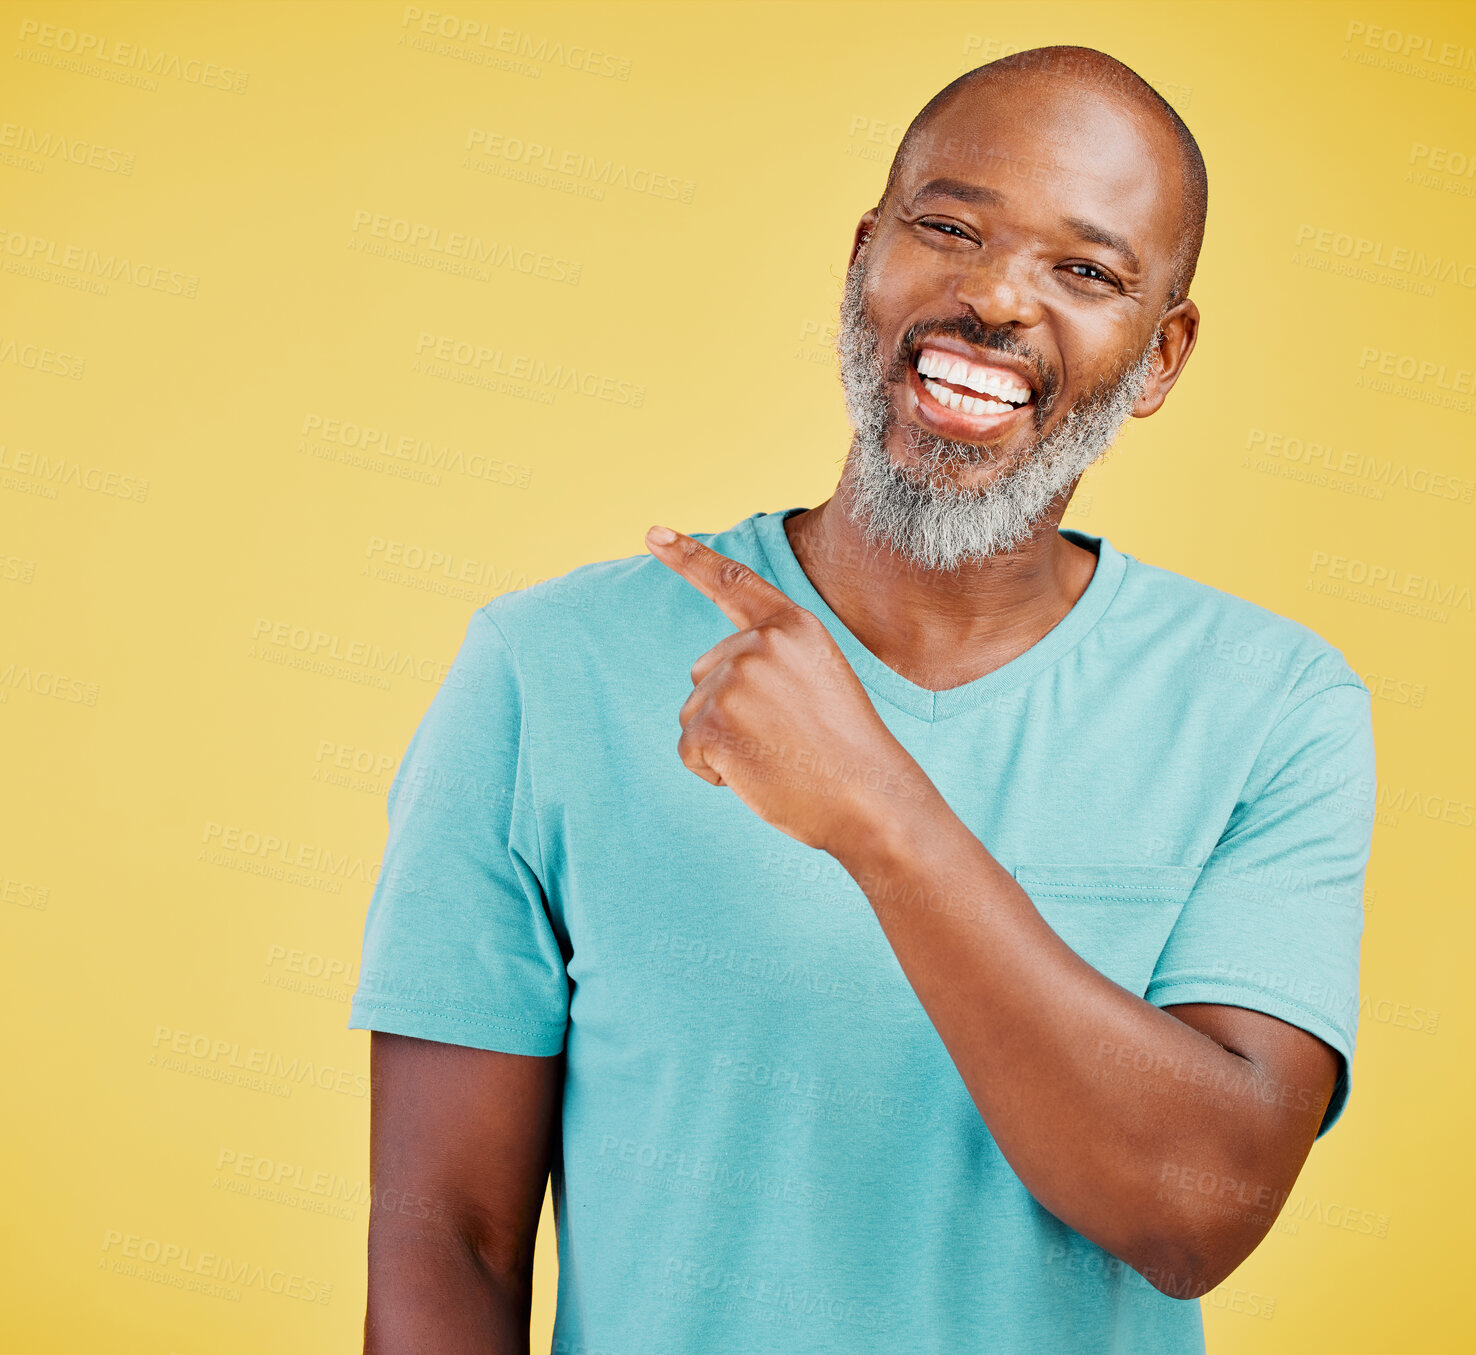 Buy stock photo Mature african man laughing and pointing in a direction against a yellow studio background. Black guy giggling and making a pointing gesture reacting with laughter while looking cheerful and happy. Lighten the mood with an amusing and funny joke